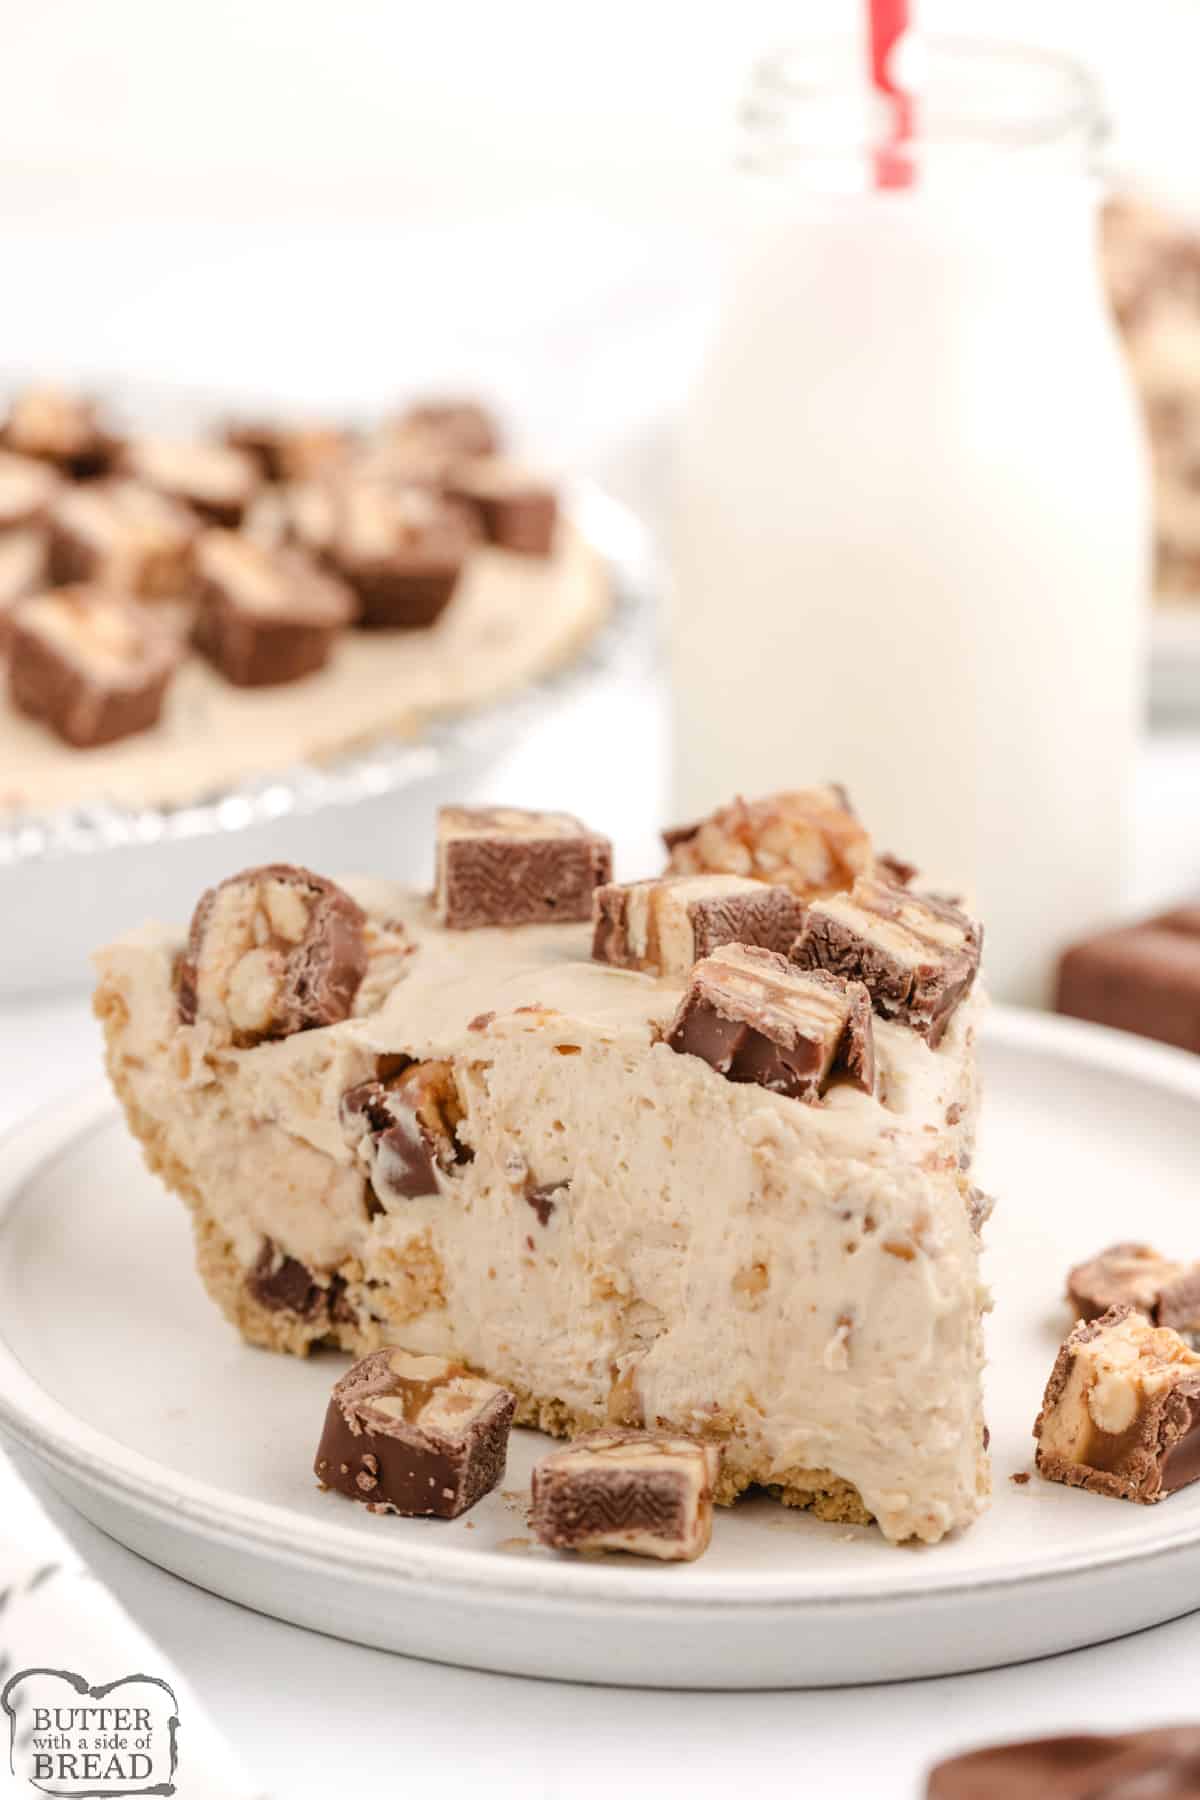 Slice of no bake peanut butter pie with Snickers.